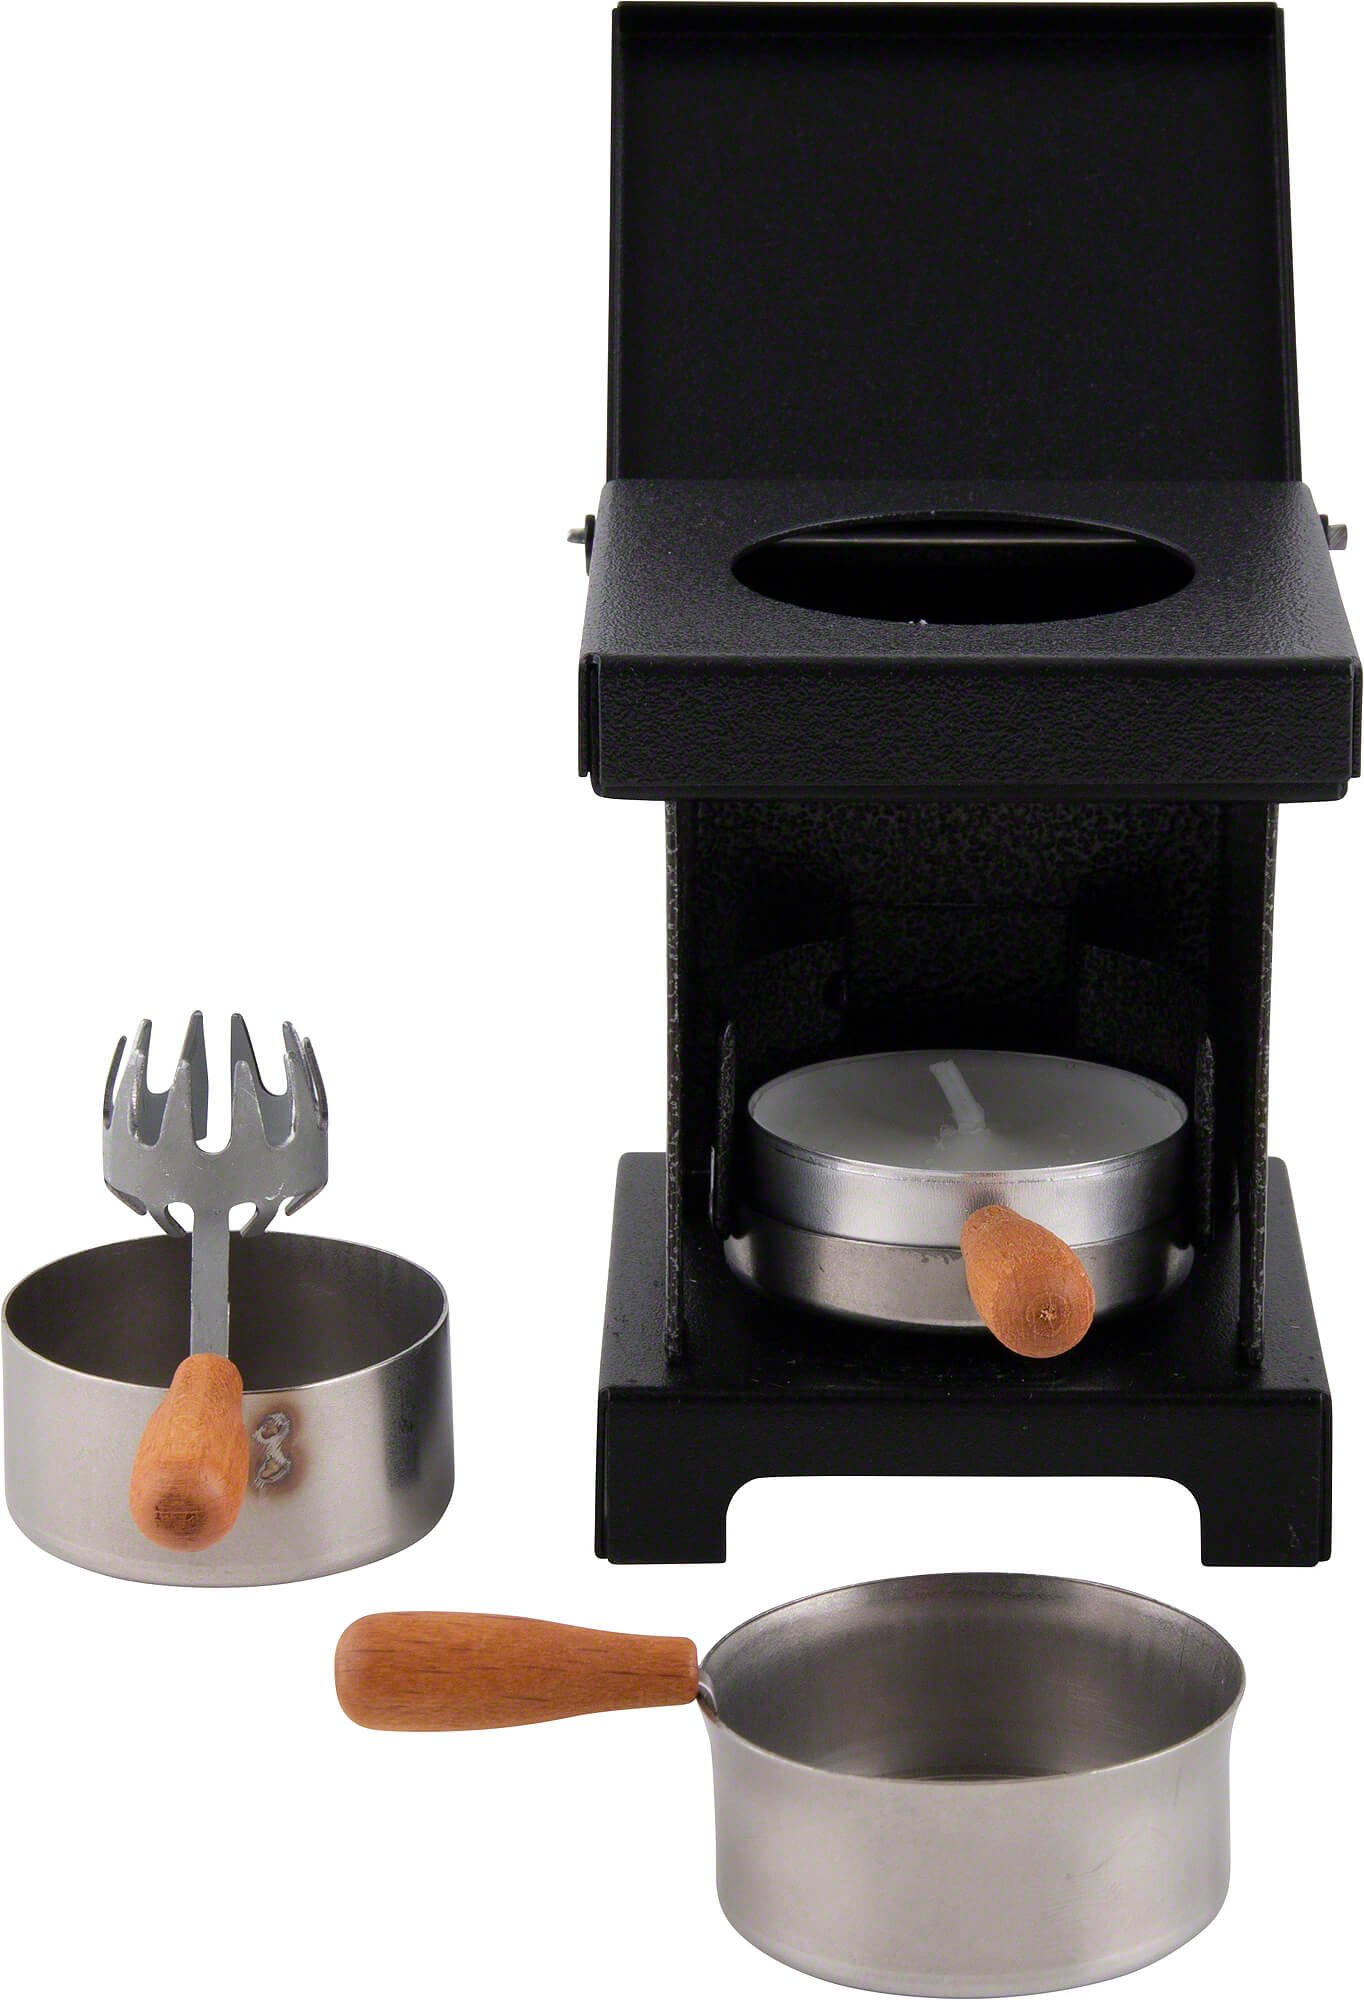 Unboxing Miniature Cooking Stove (Huss Stools Incense Stove) 